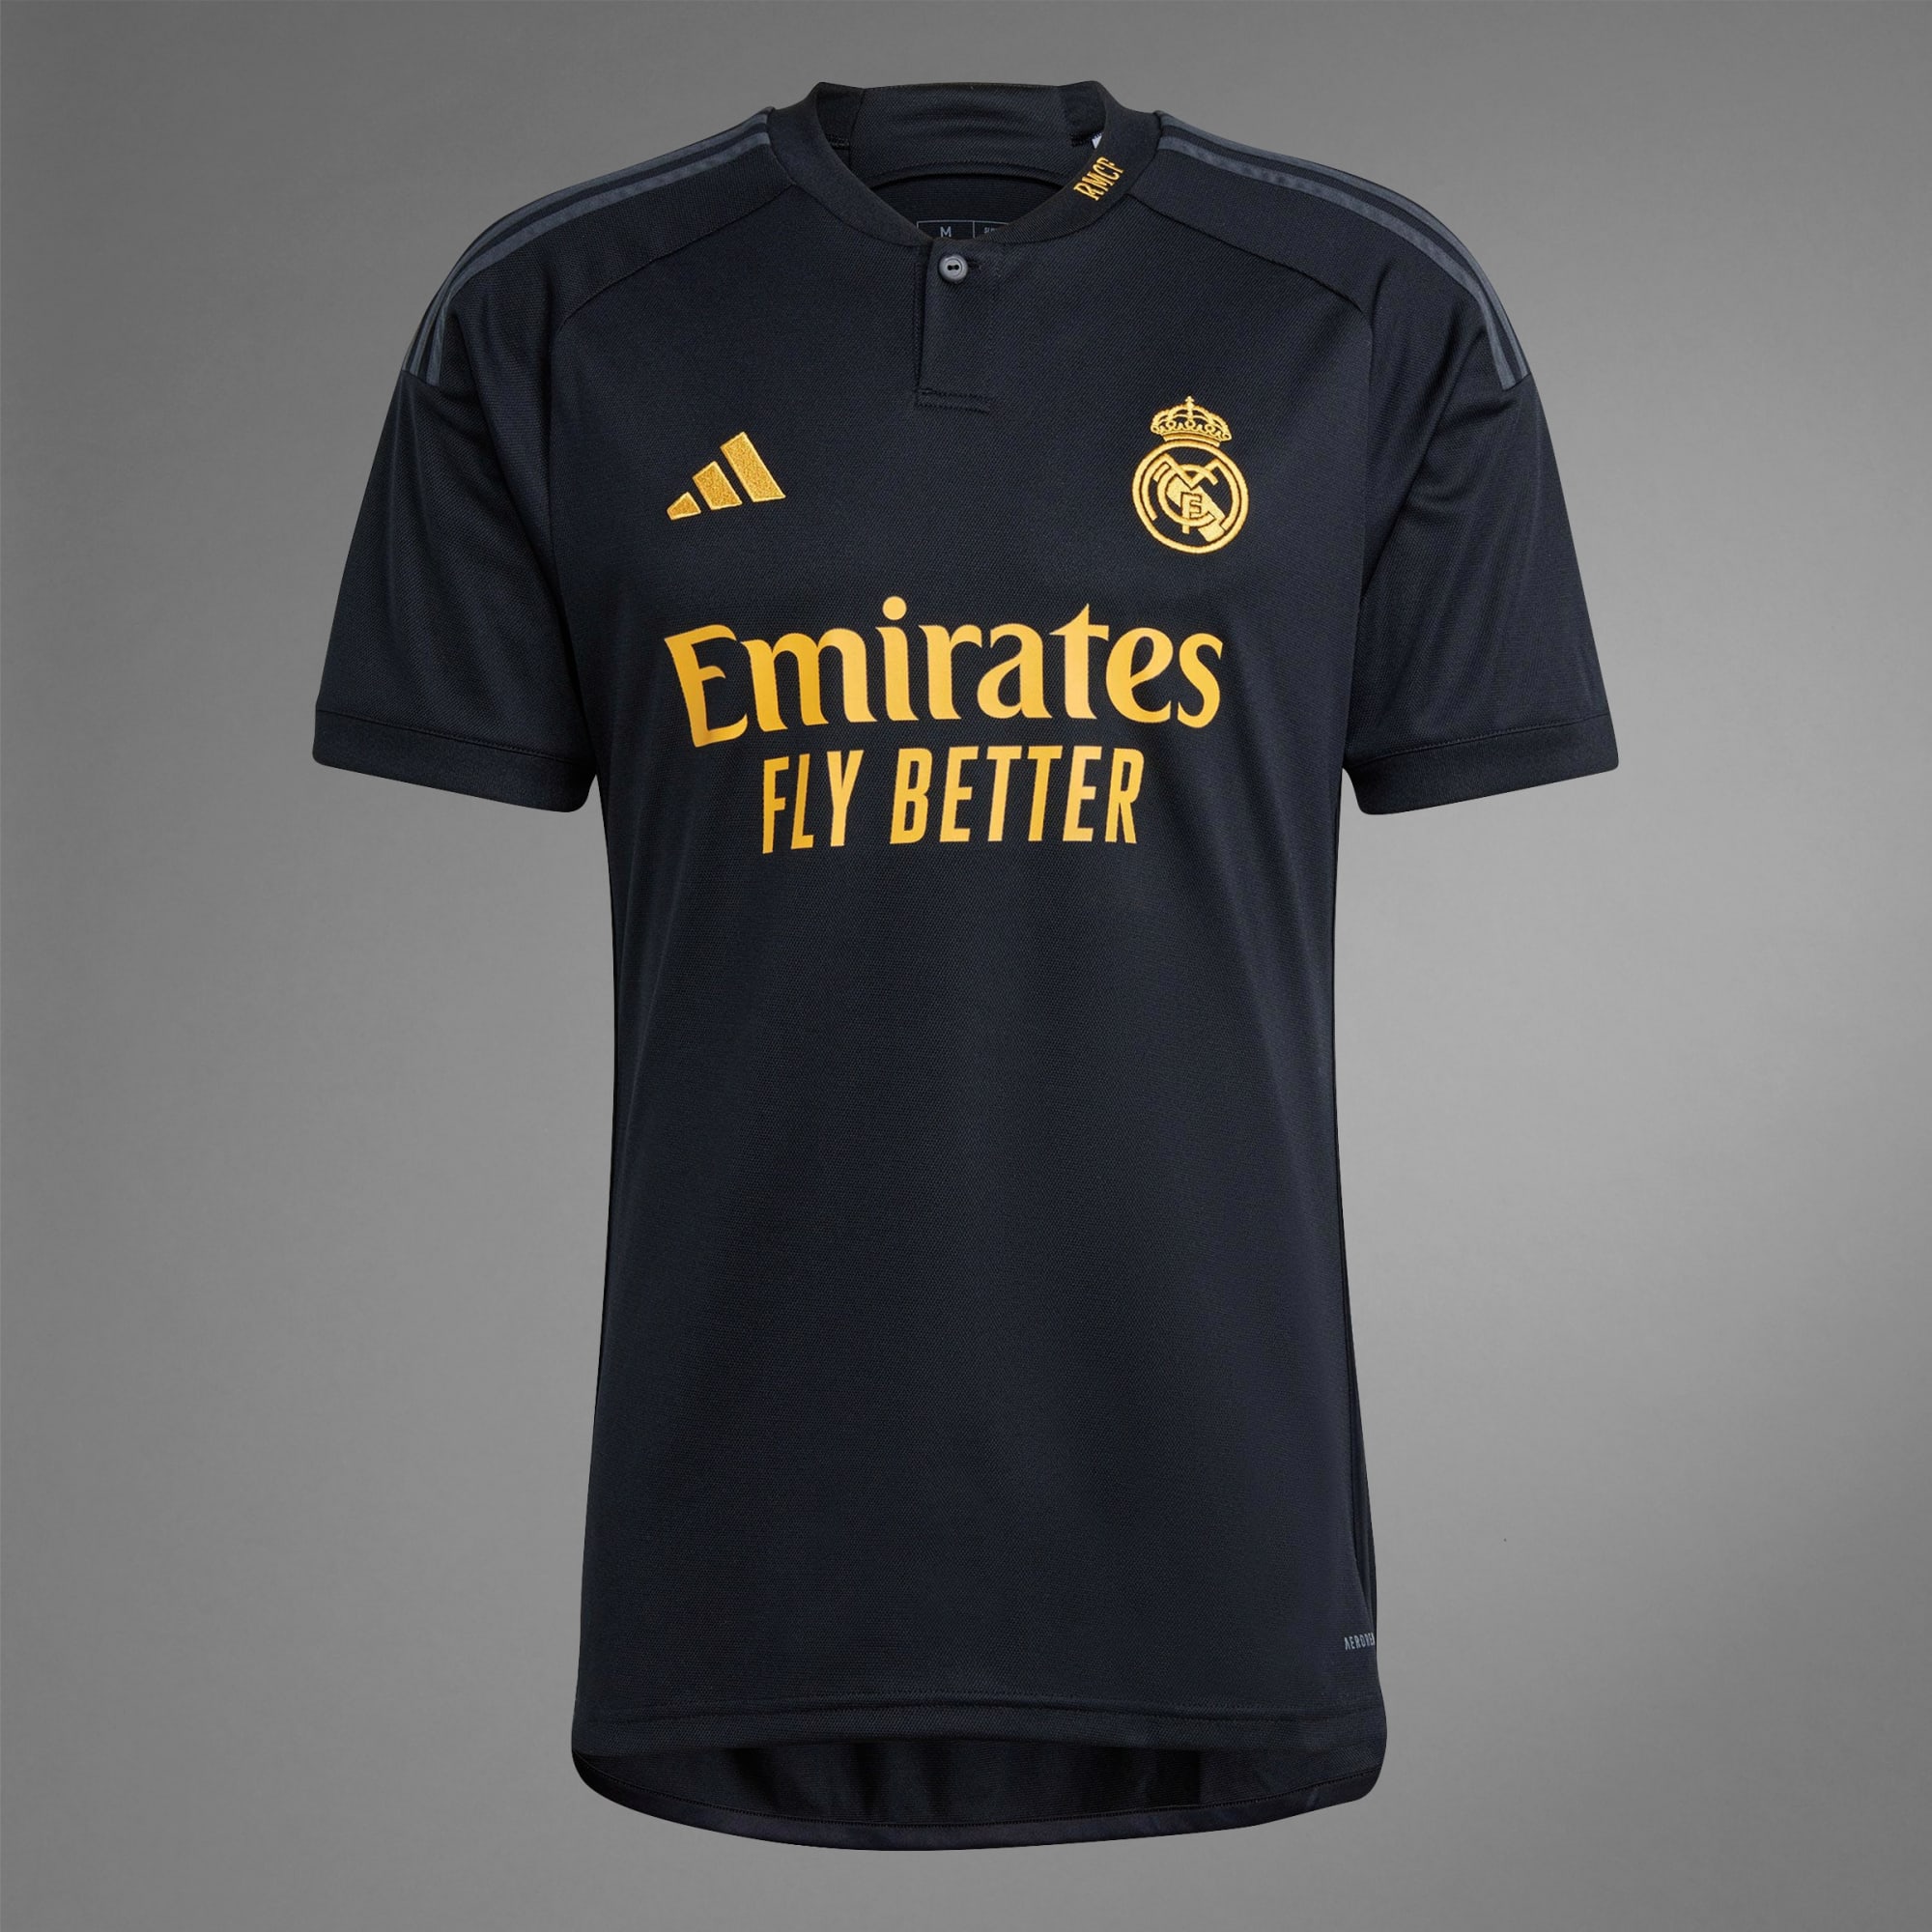 Accessories - Real Madrid Official Store - Real Madrid CF